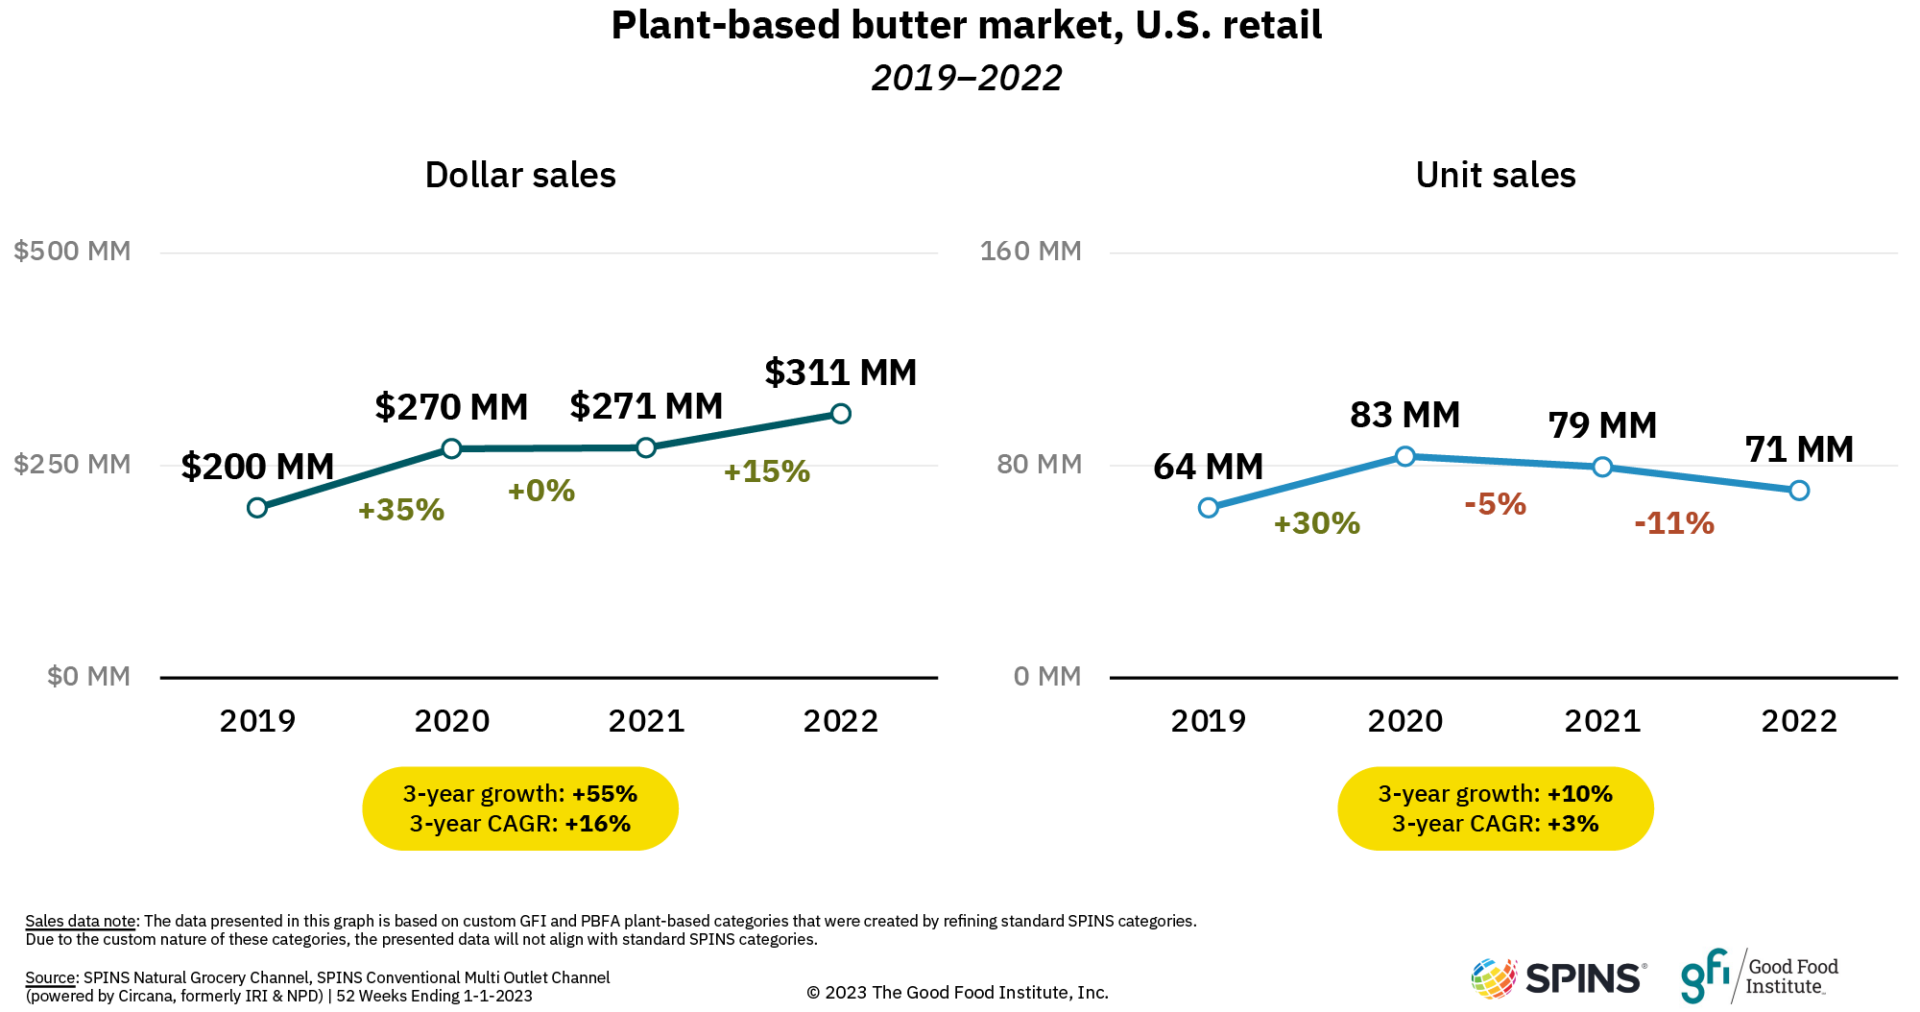 Summary of plant-based butter sales data